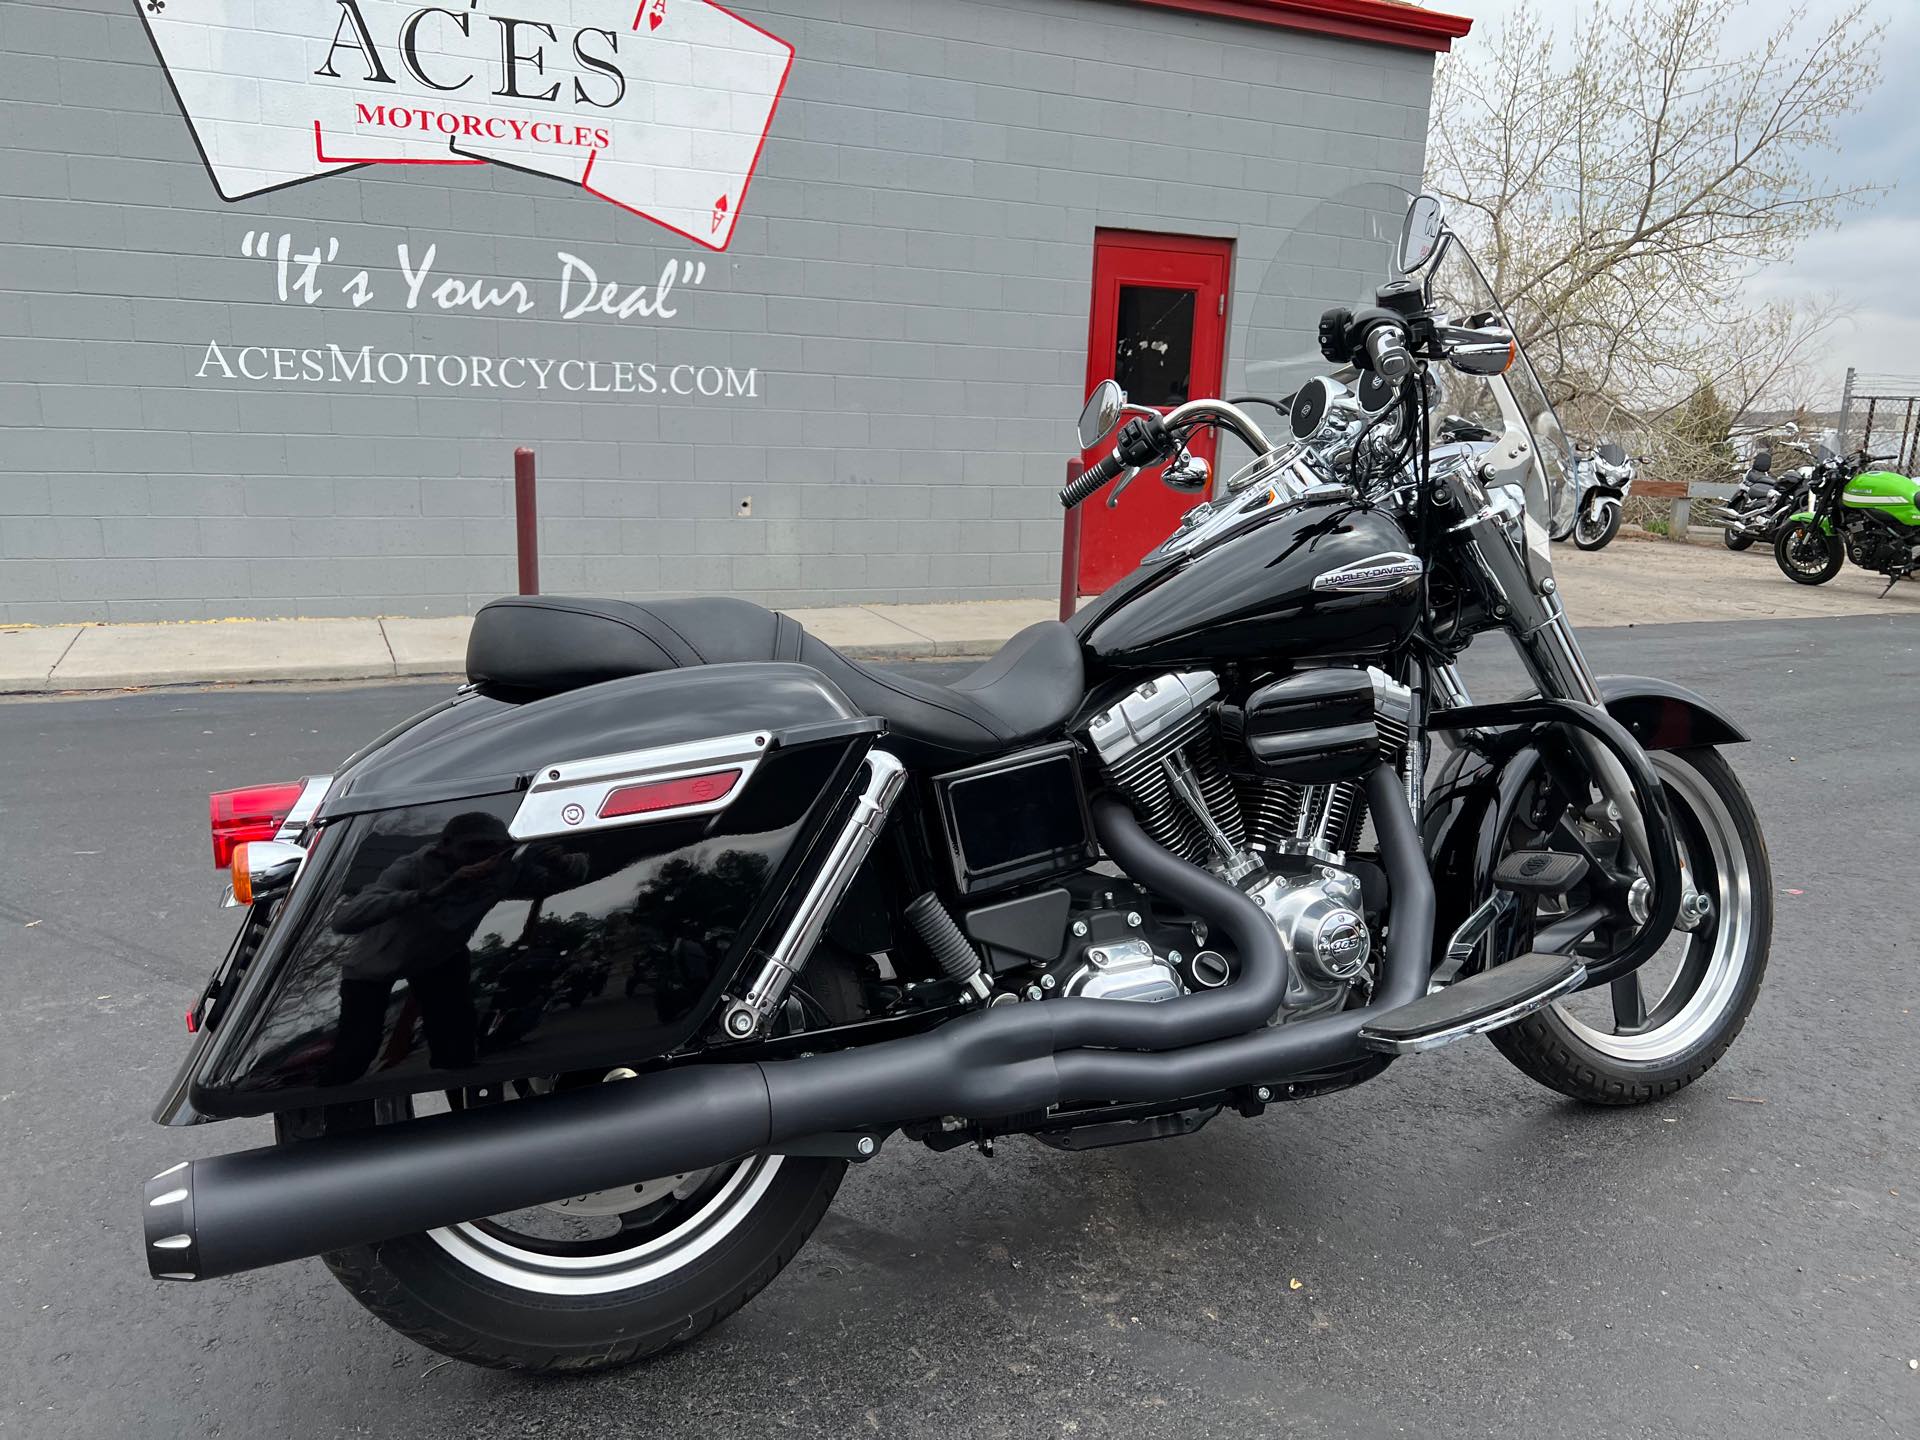 2012 Harley-Davidson Dyna Glide Switchback at Aces Motorcycles - Fort Collins